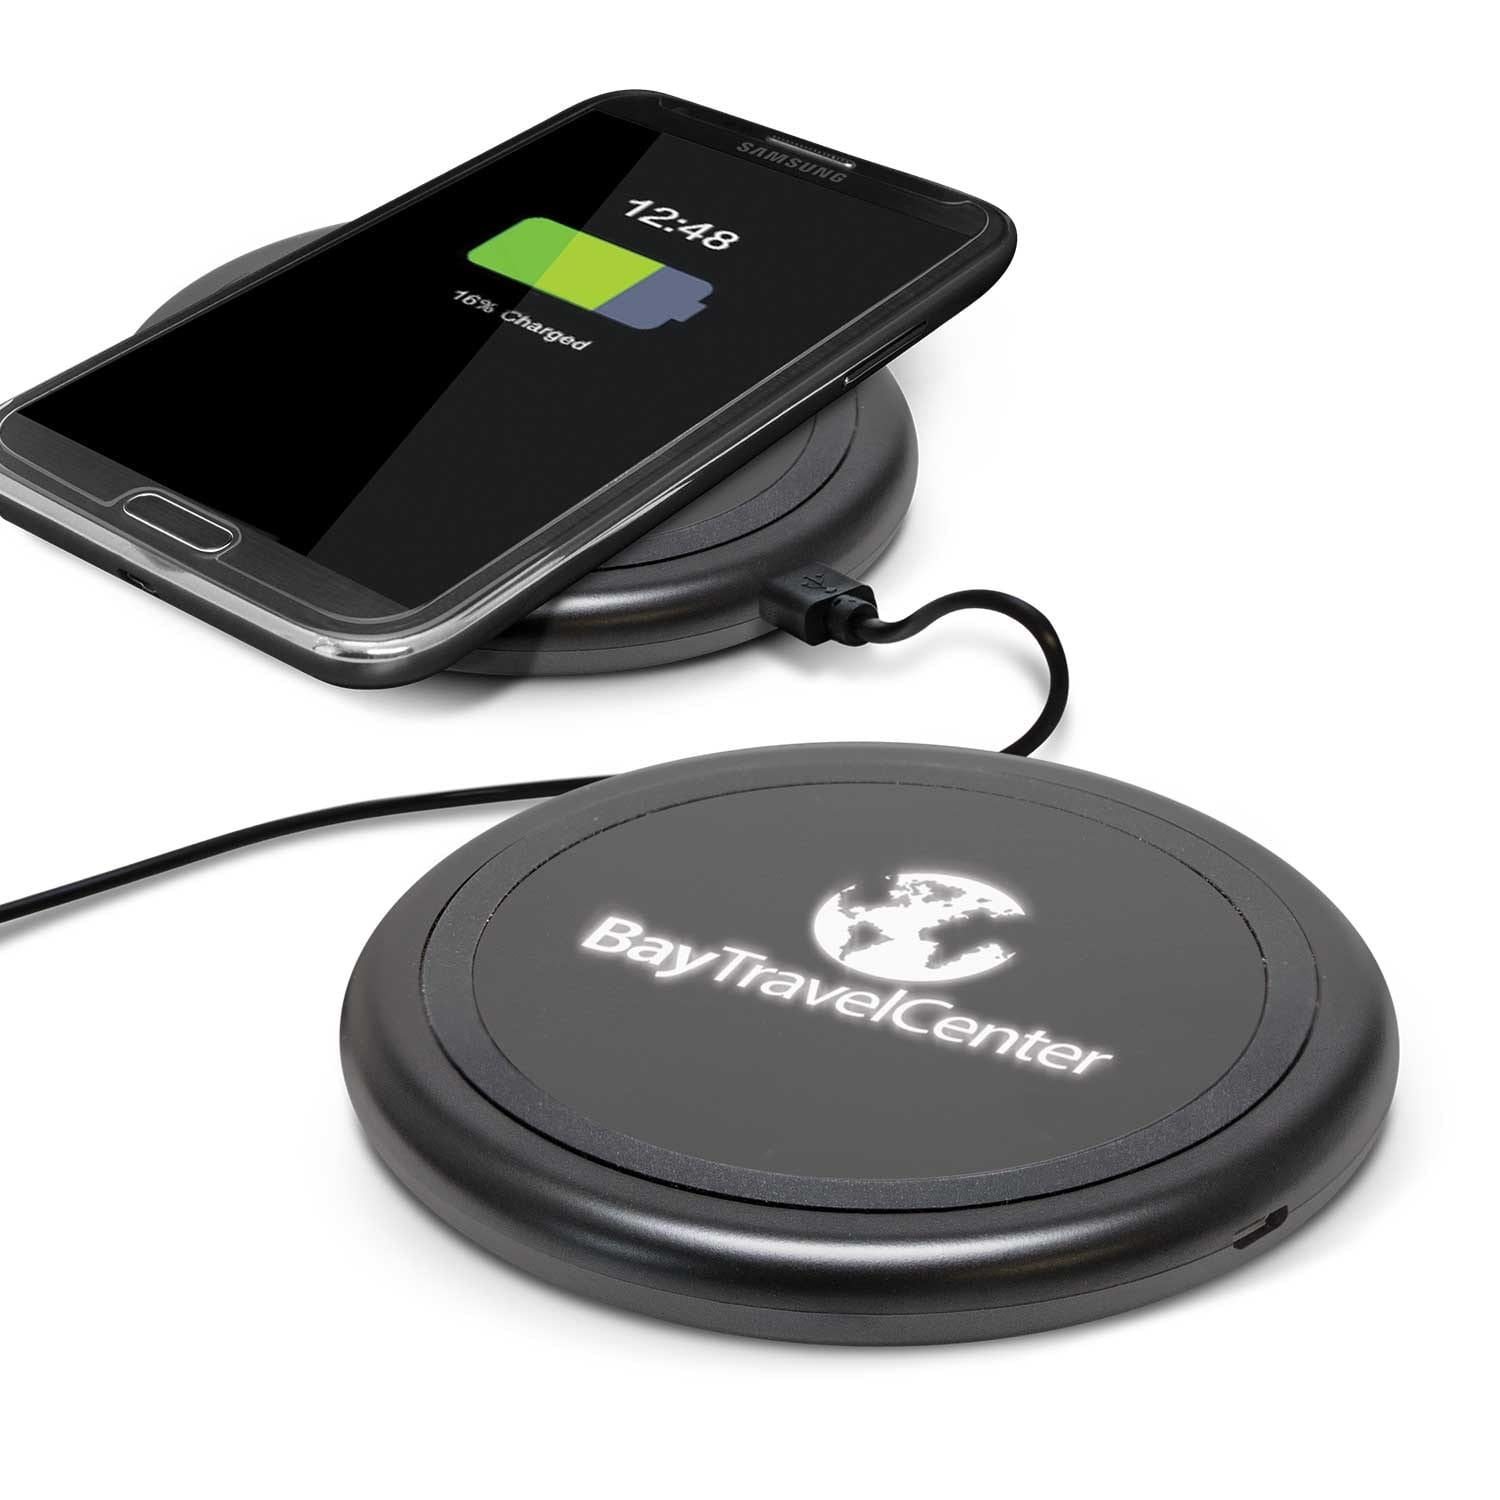 Trends Lumos Wireless Charger charger